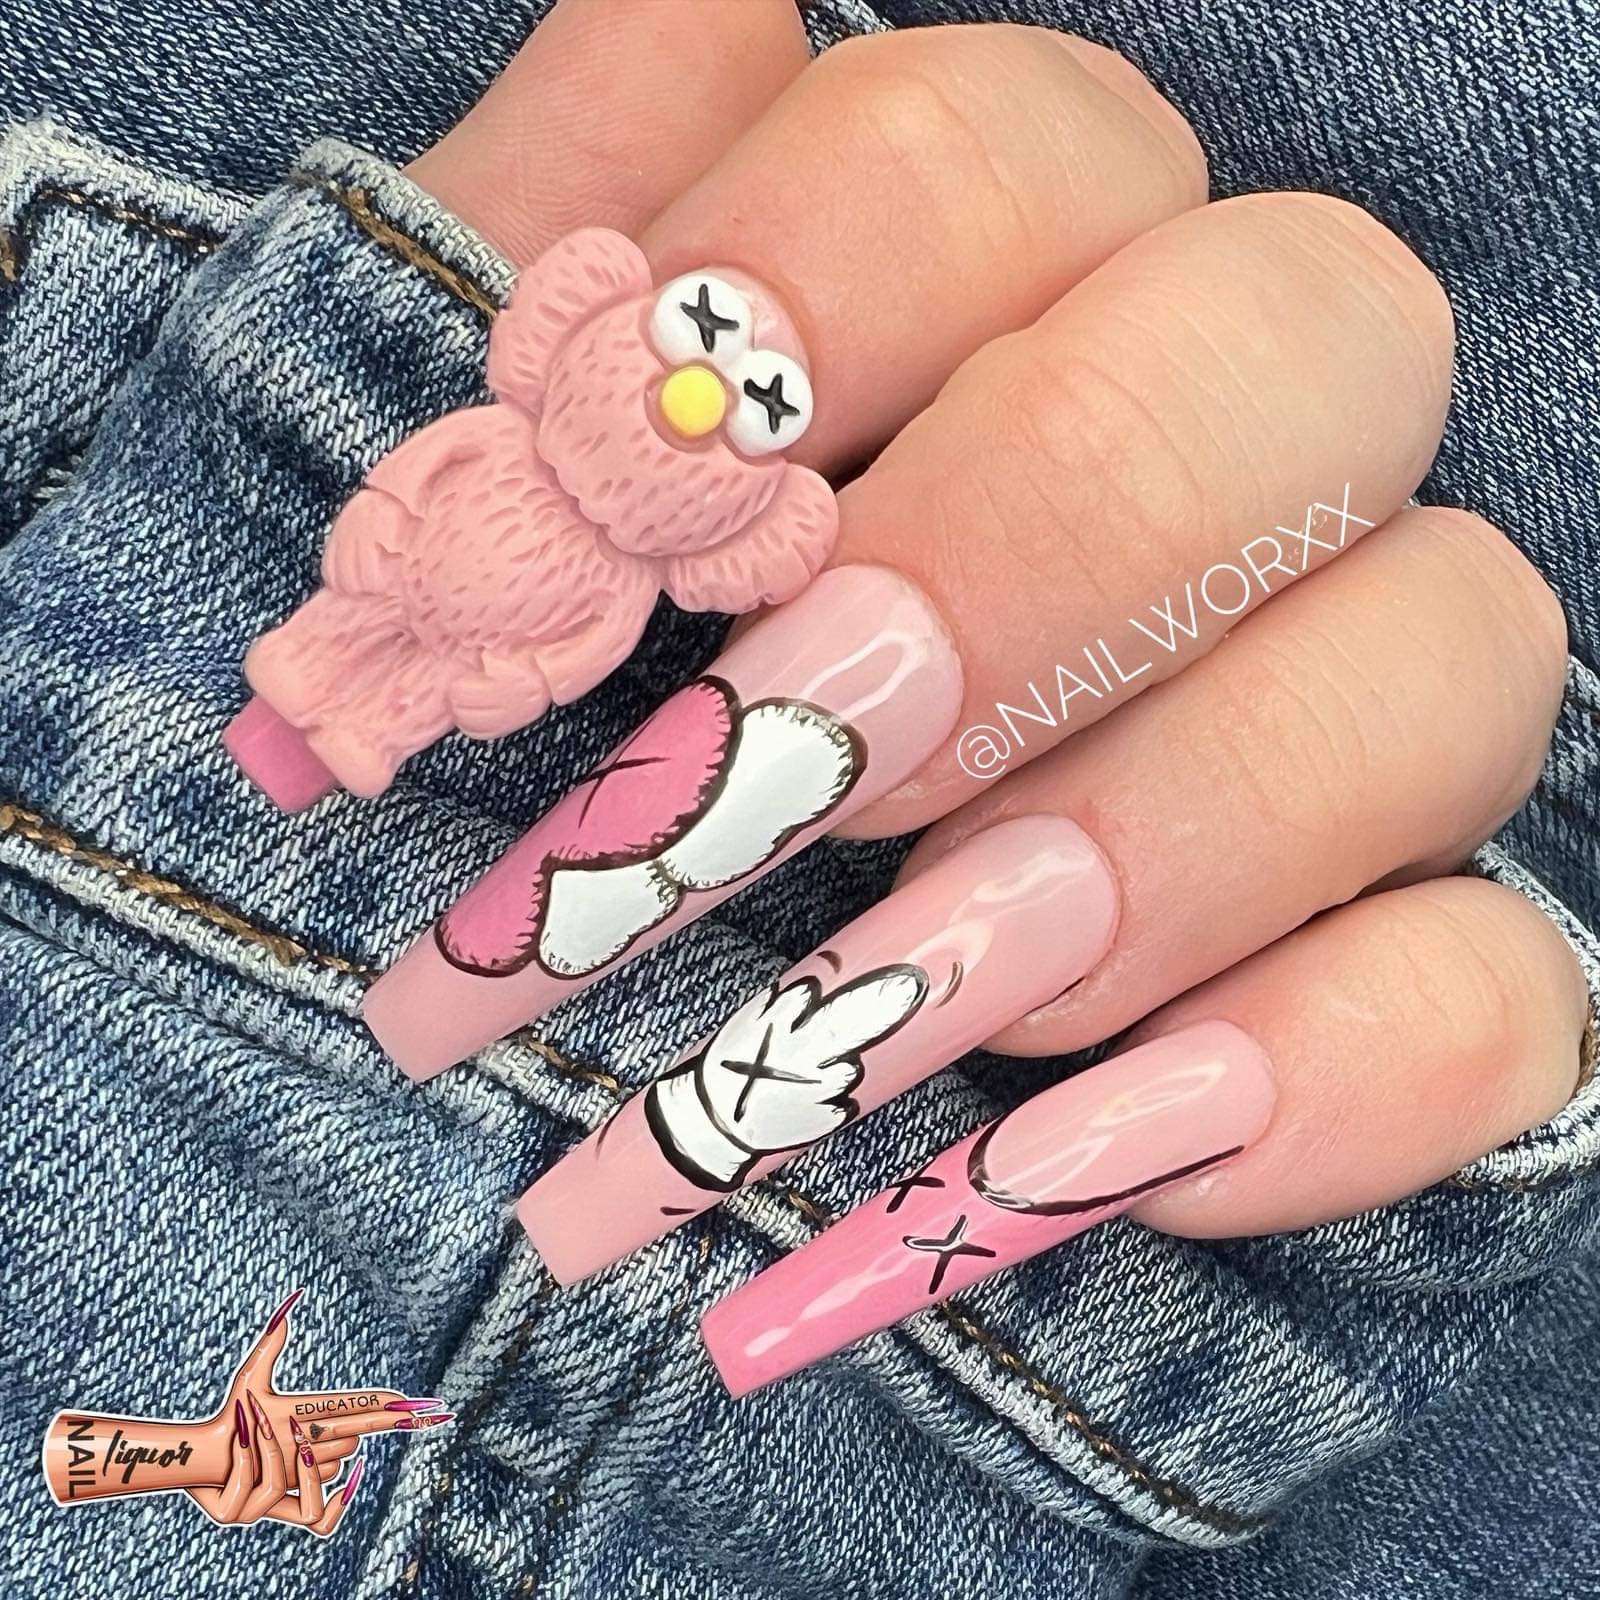 𝐁𝐀𝐘 𝐀𝐑𝐄𝐀 𝐍𝐀𝐈𝐋 𝐀𝐑𝐓𝐈𝐒𝐓 on Instagram: “He gon' choose her  every time KAWS it's cheaper to keep her” 🤣😉 KAWS babyyyy, nails are  expensive!! . . . Charms - @nailwaresf . . . . . #